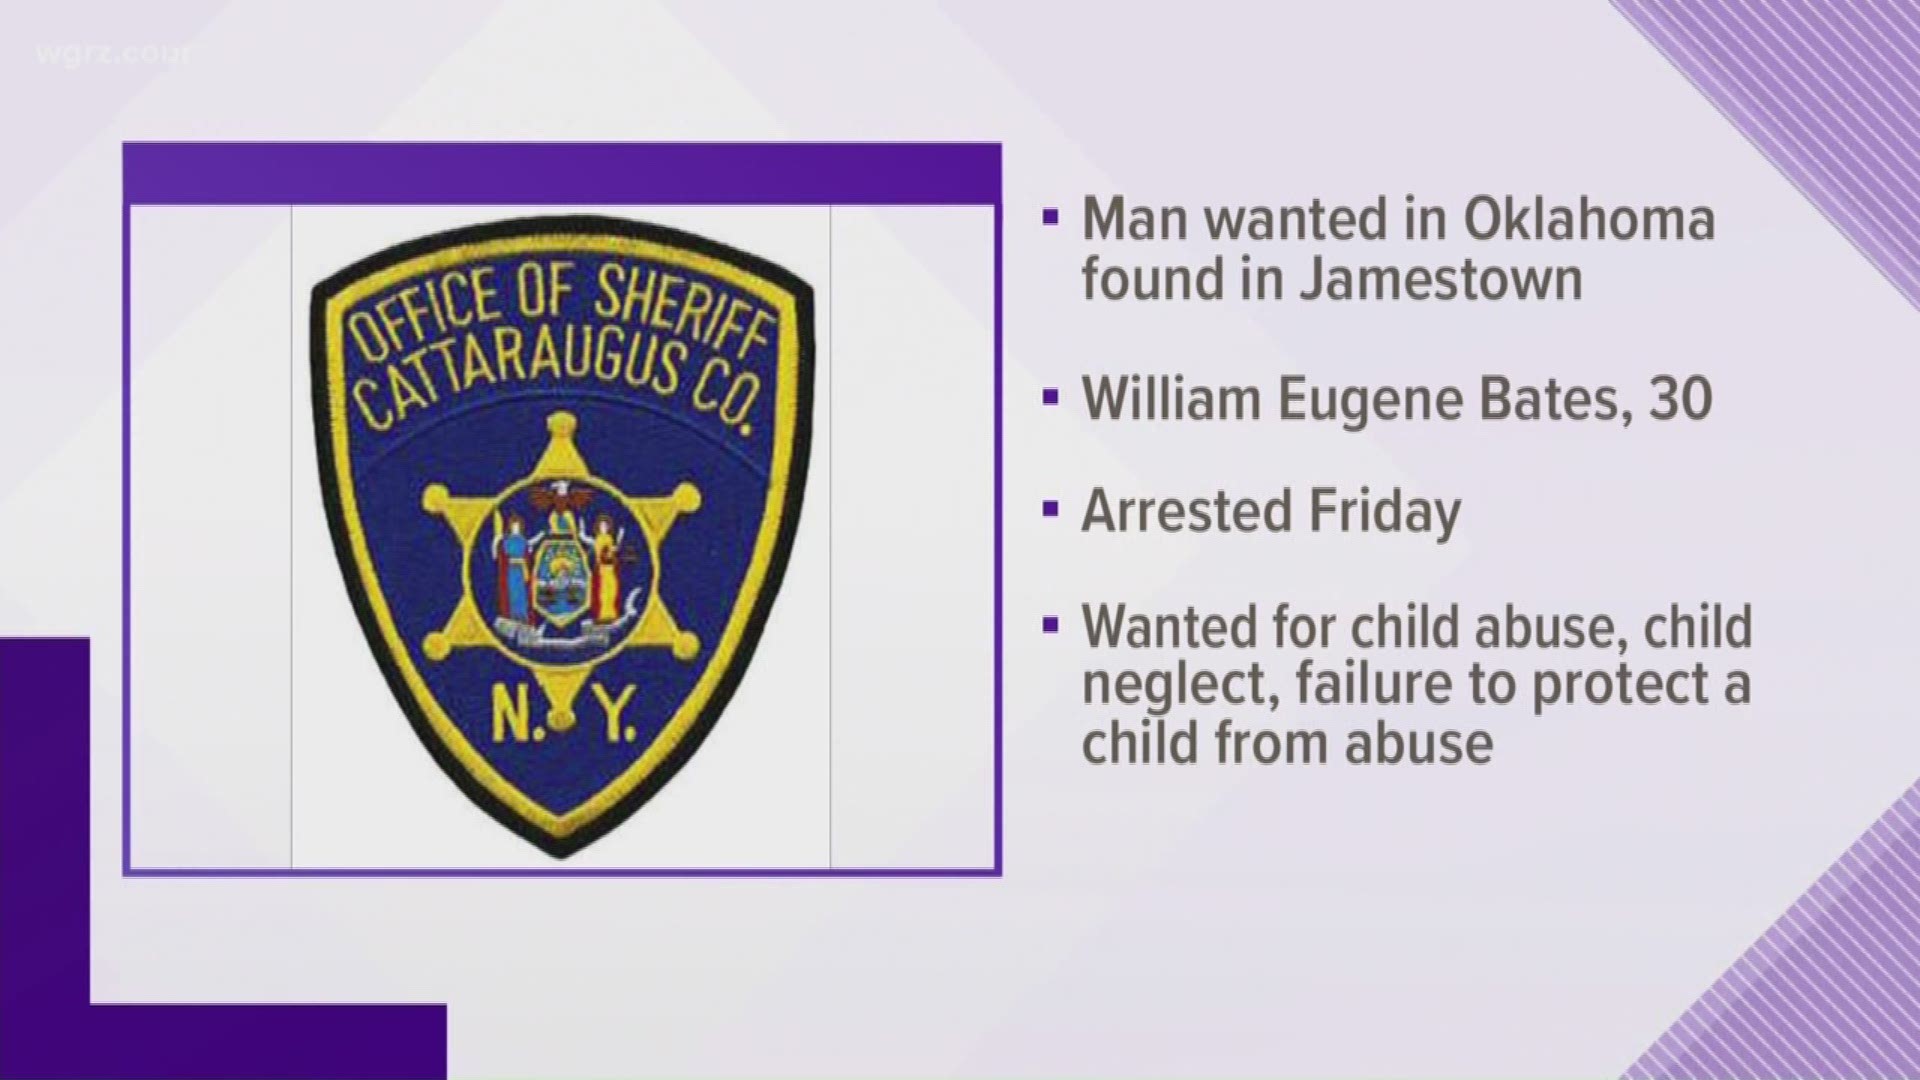 The man was wanted on felony charges of child abuse, child neglect, and failure to protect a child from abuse.